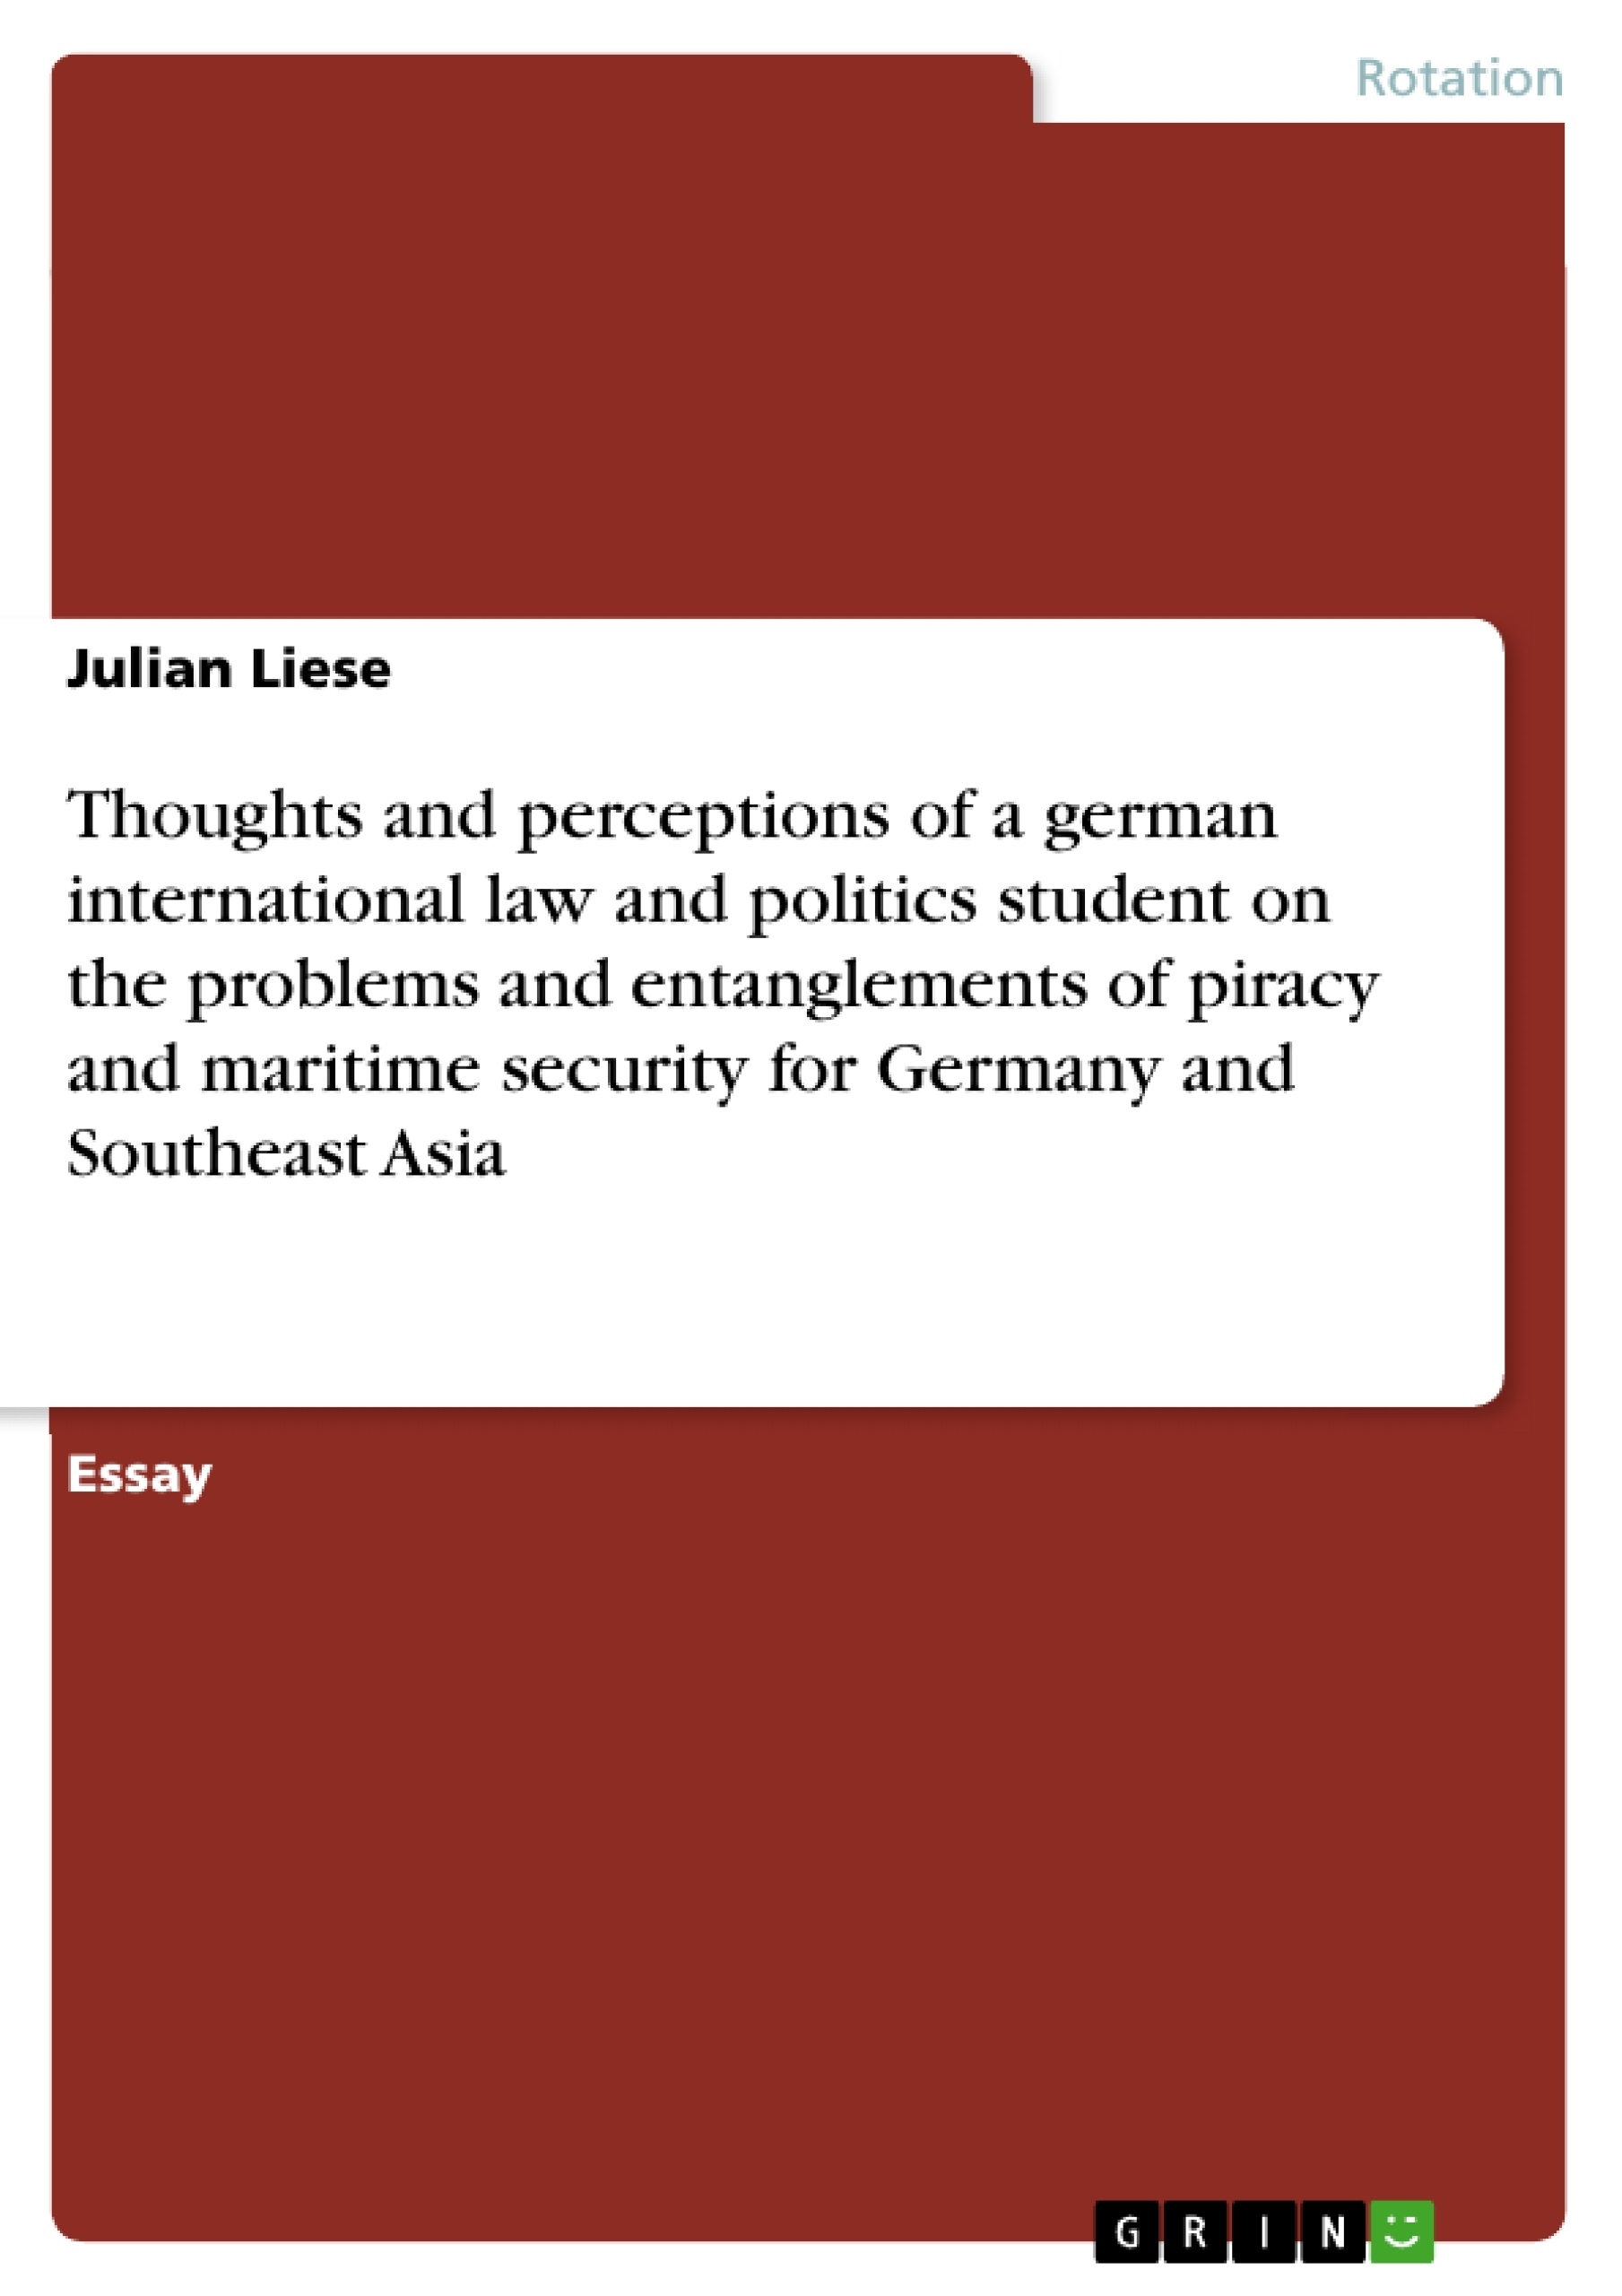 Título: Thoughts and perceptions of a german international law and politics student on the problems and entanglements of piracy and maritime security for Germany and Southeast Asia